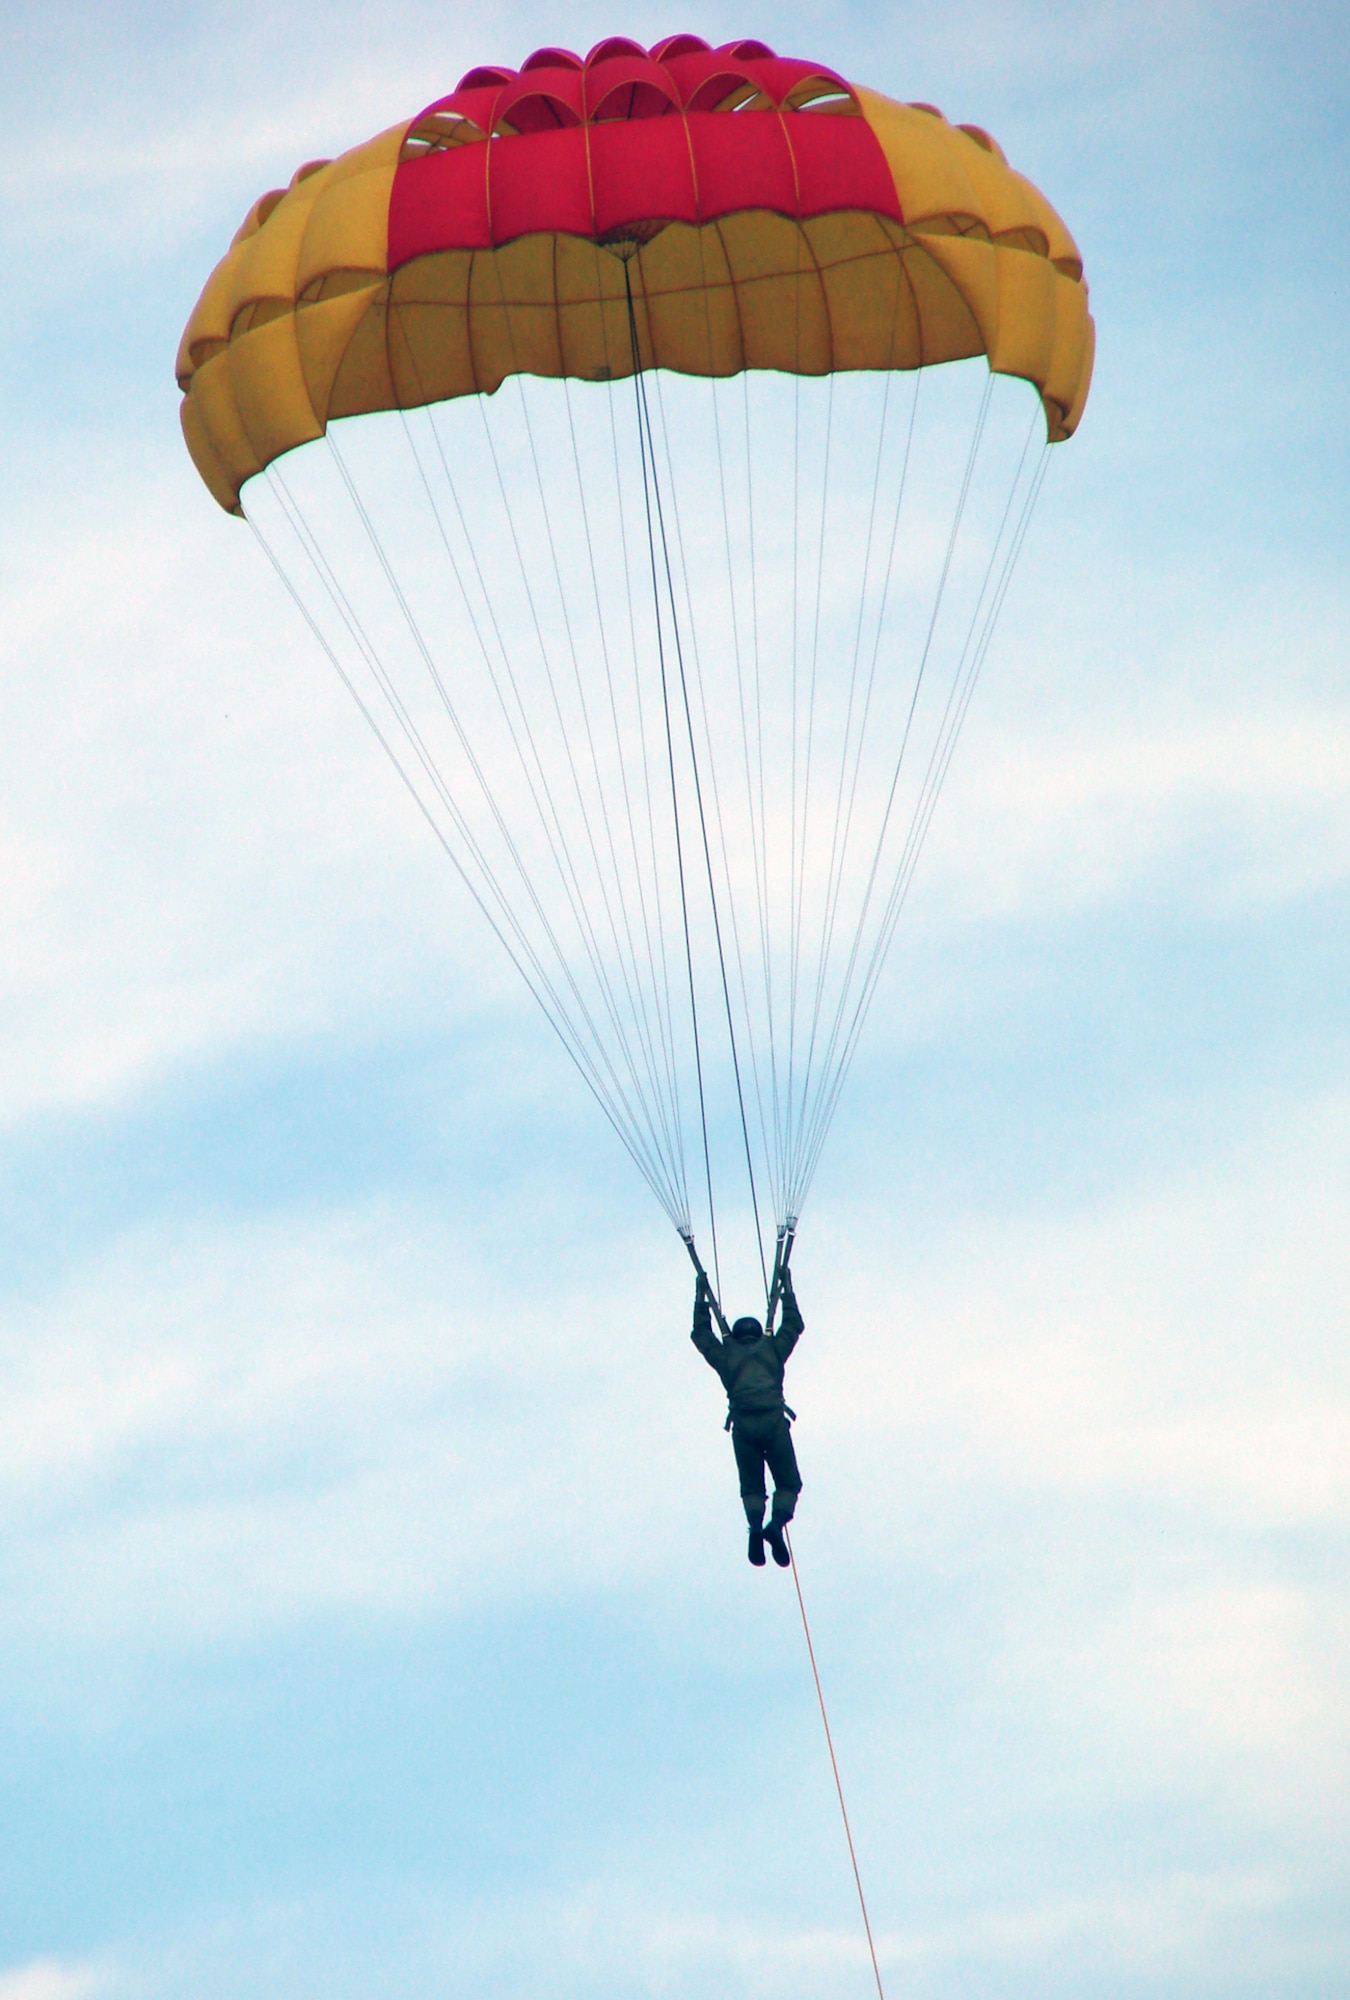 Second Lieutenant Philip DeLong, a student of Class 08-15, demonstrates landing techniques during parasailing training Oct. 15. Lieutenant DeLong was the last student pilot to parasail at Vance Air Force Base. (U.S. Air Force photo by Tech. Sgt. Mary Davis)